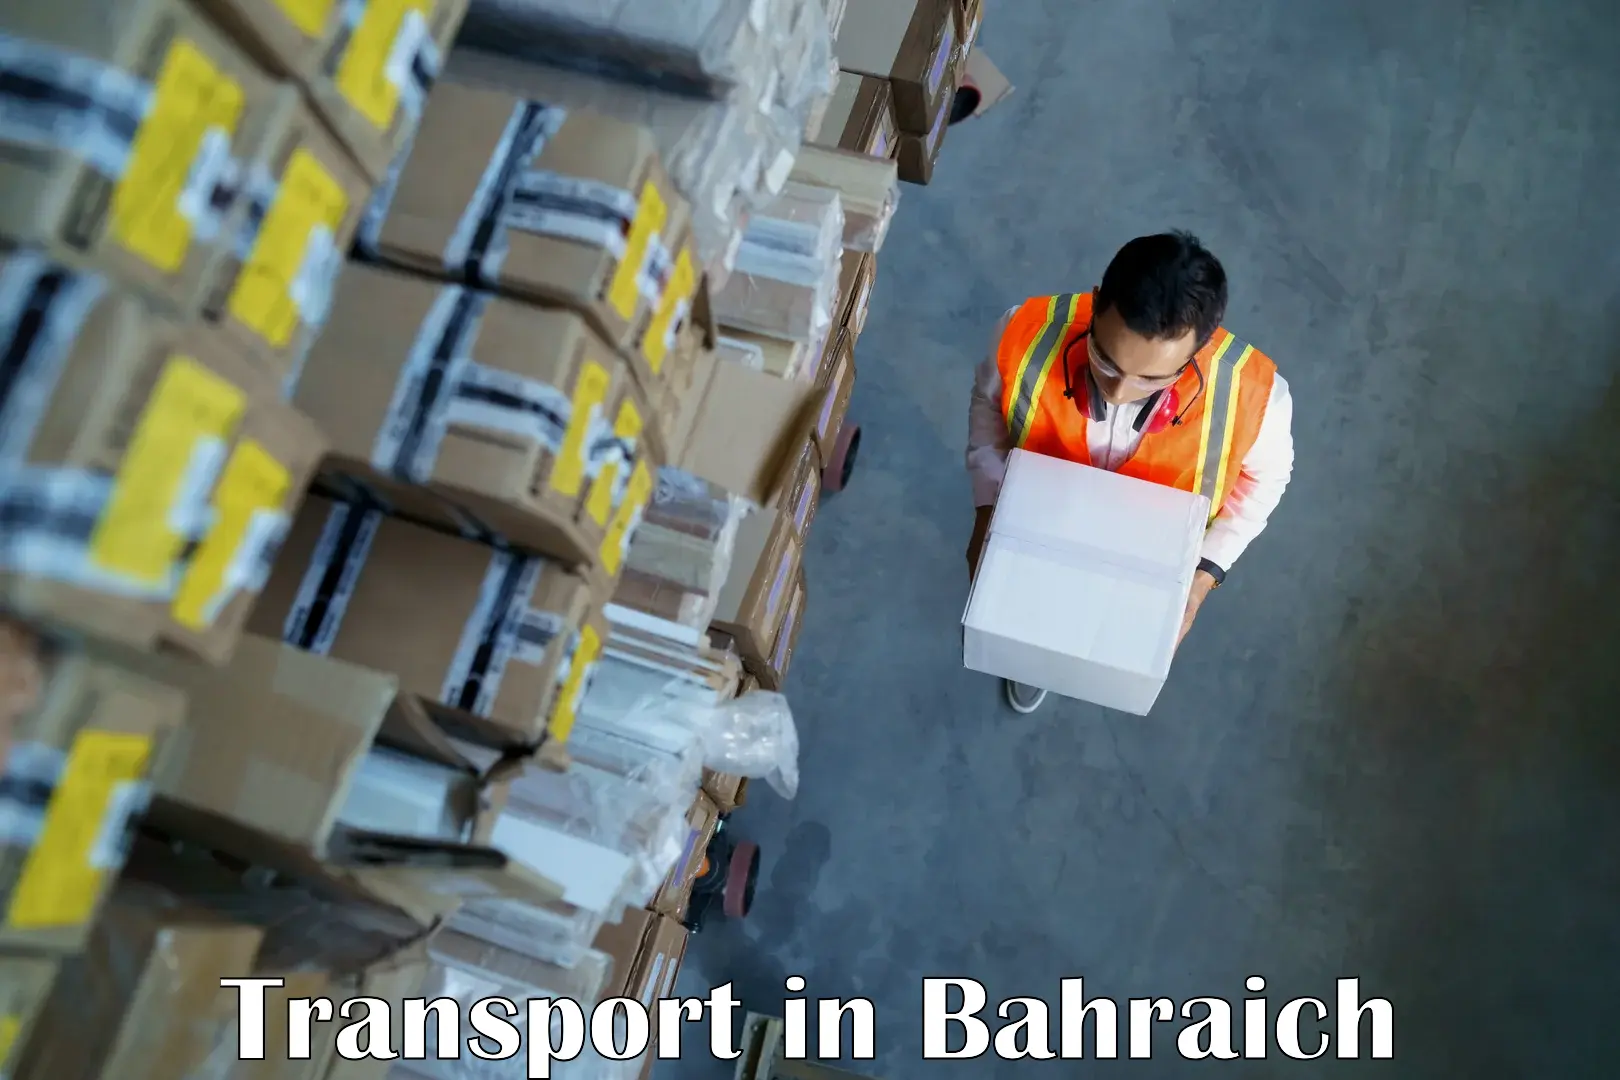 Daily parcel service transport in Bahraich